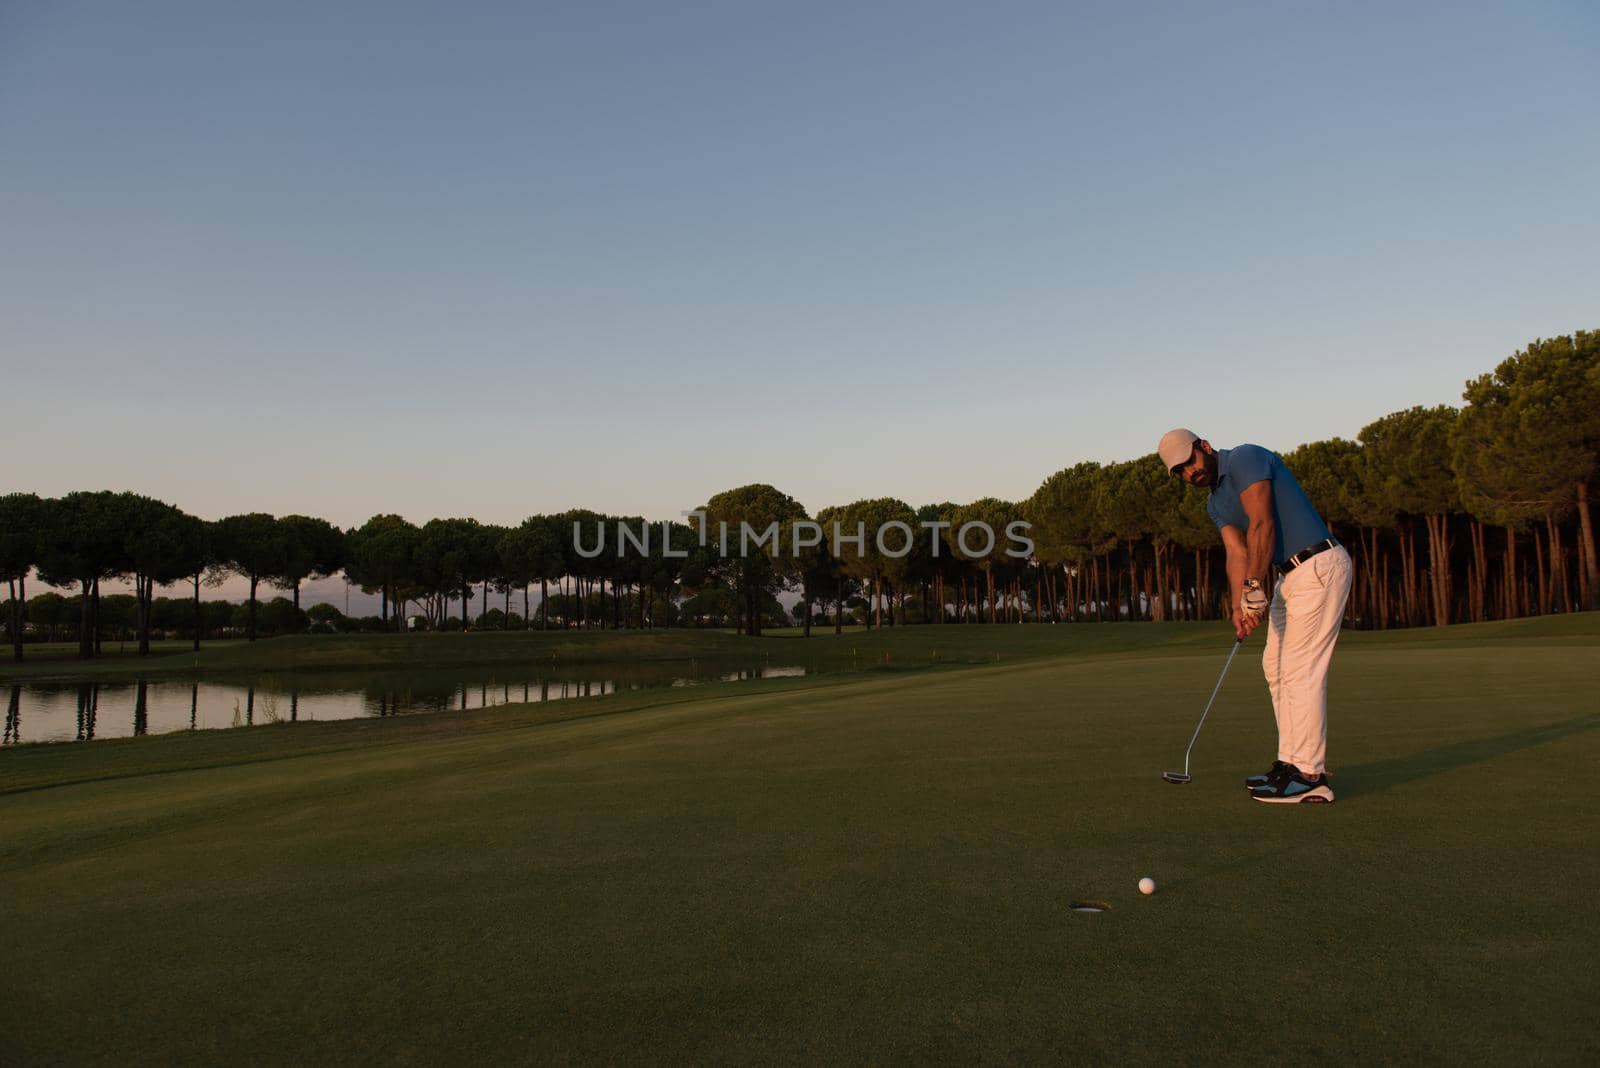 golfer hitting ball shot with driver on golf course at beautiful sunset in background